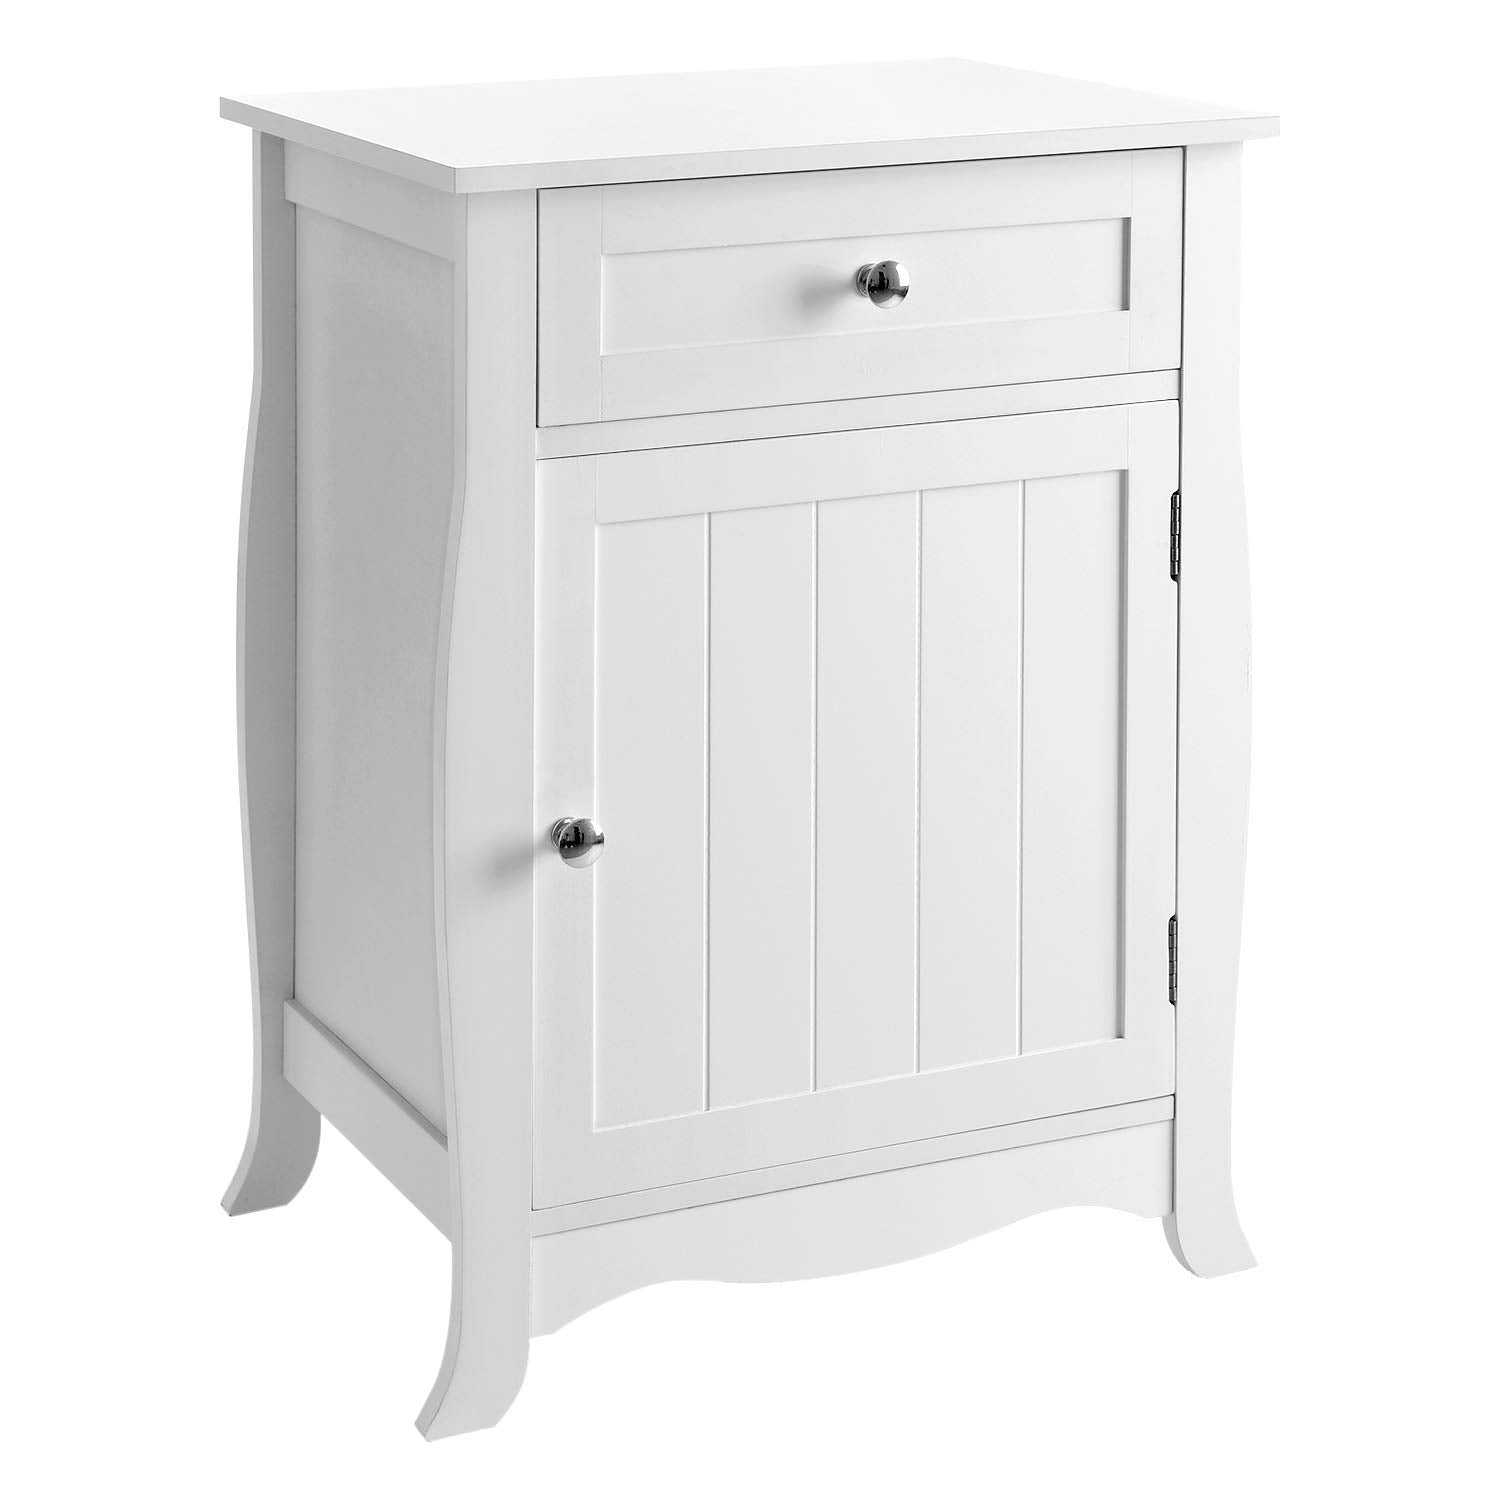 SONGMICS White Nightstand BedsideTable Wooden Ameriwood Furniture End Chair Side Table with Drawer and Cabinet Organizer for Storage ULET02WT